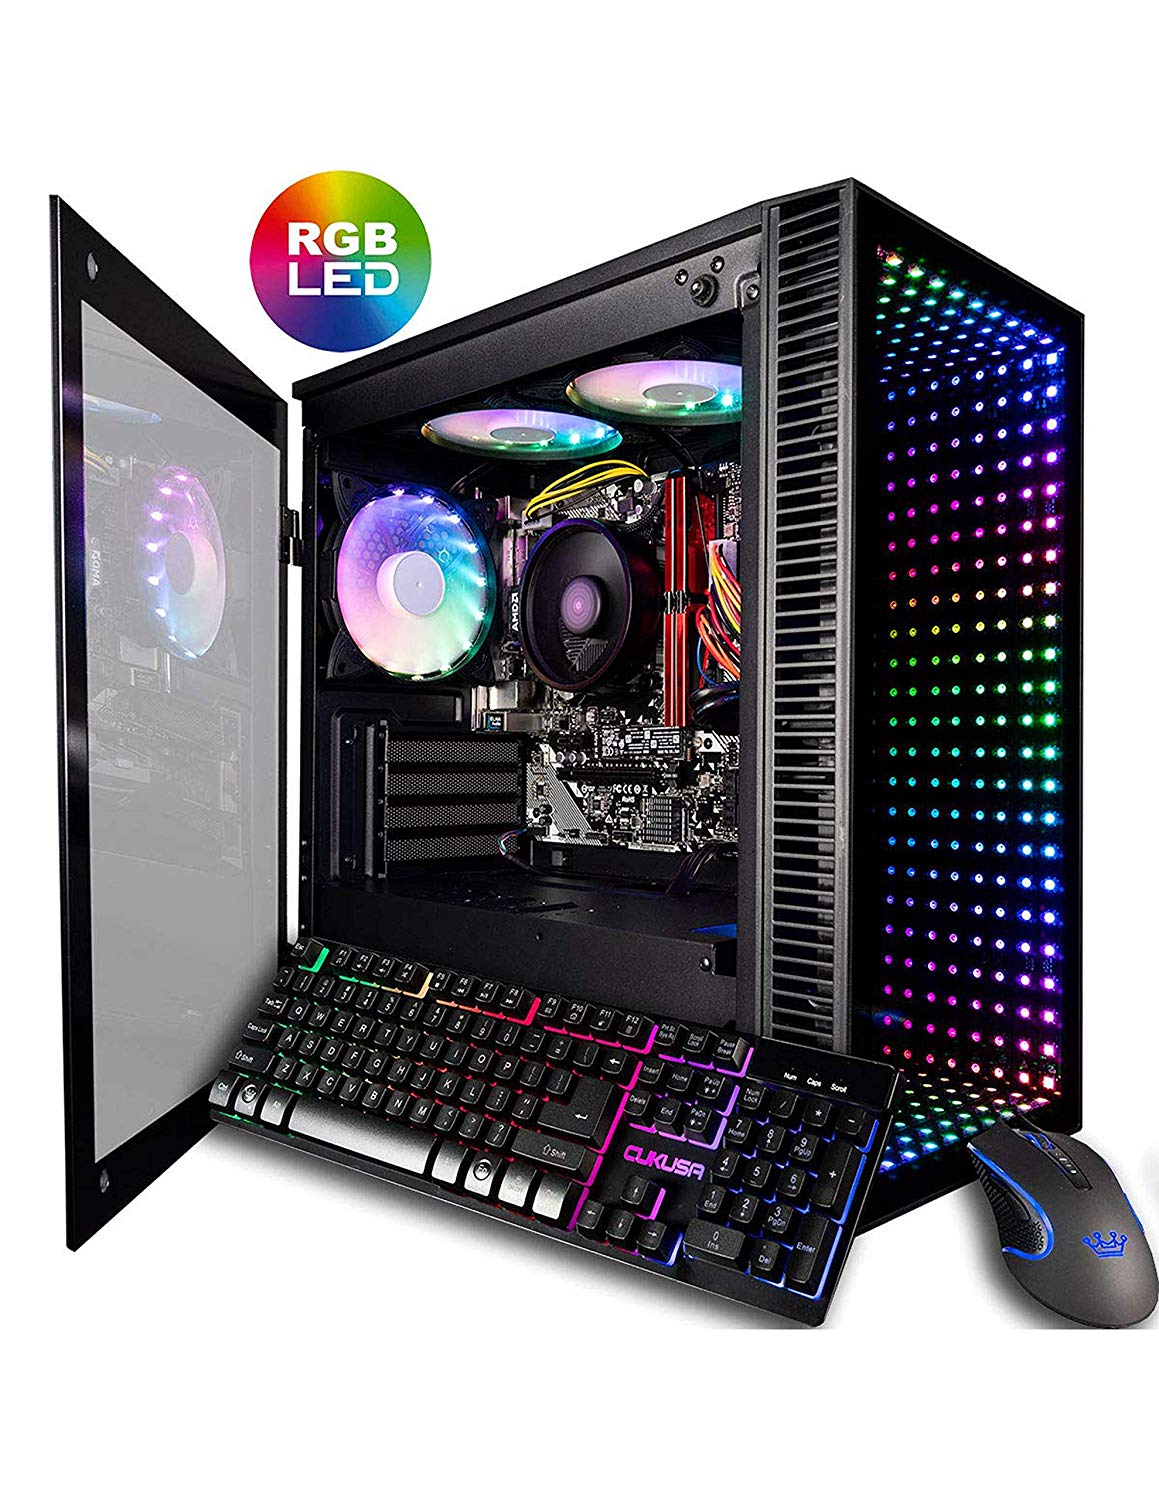 Costume Best Pc For Budget Gaming for Streamer